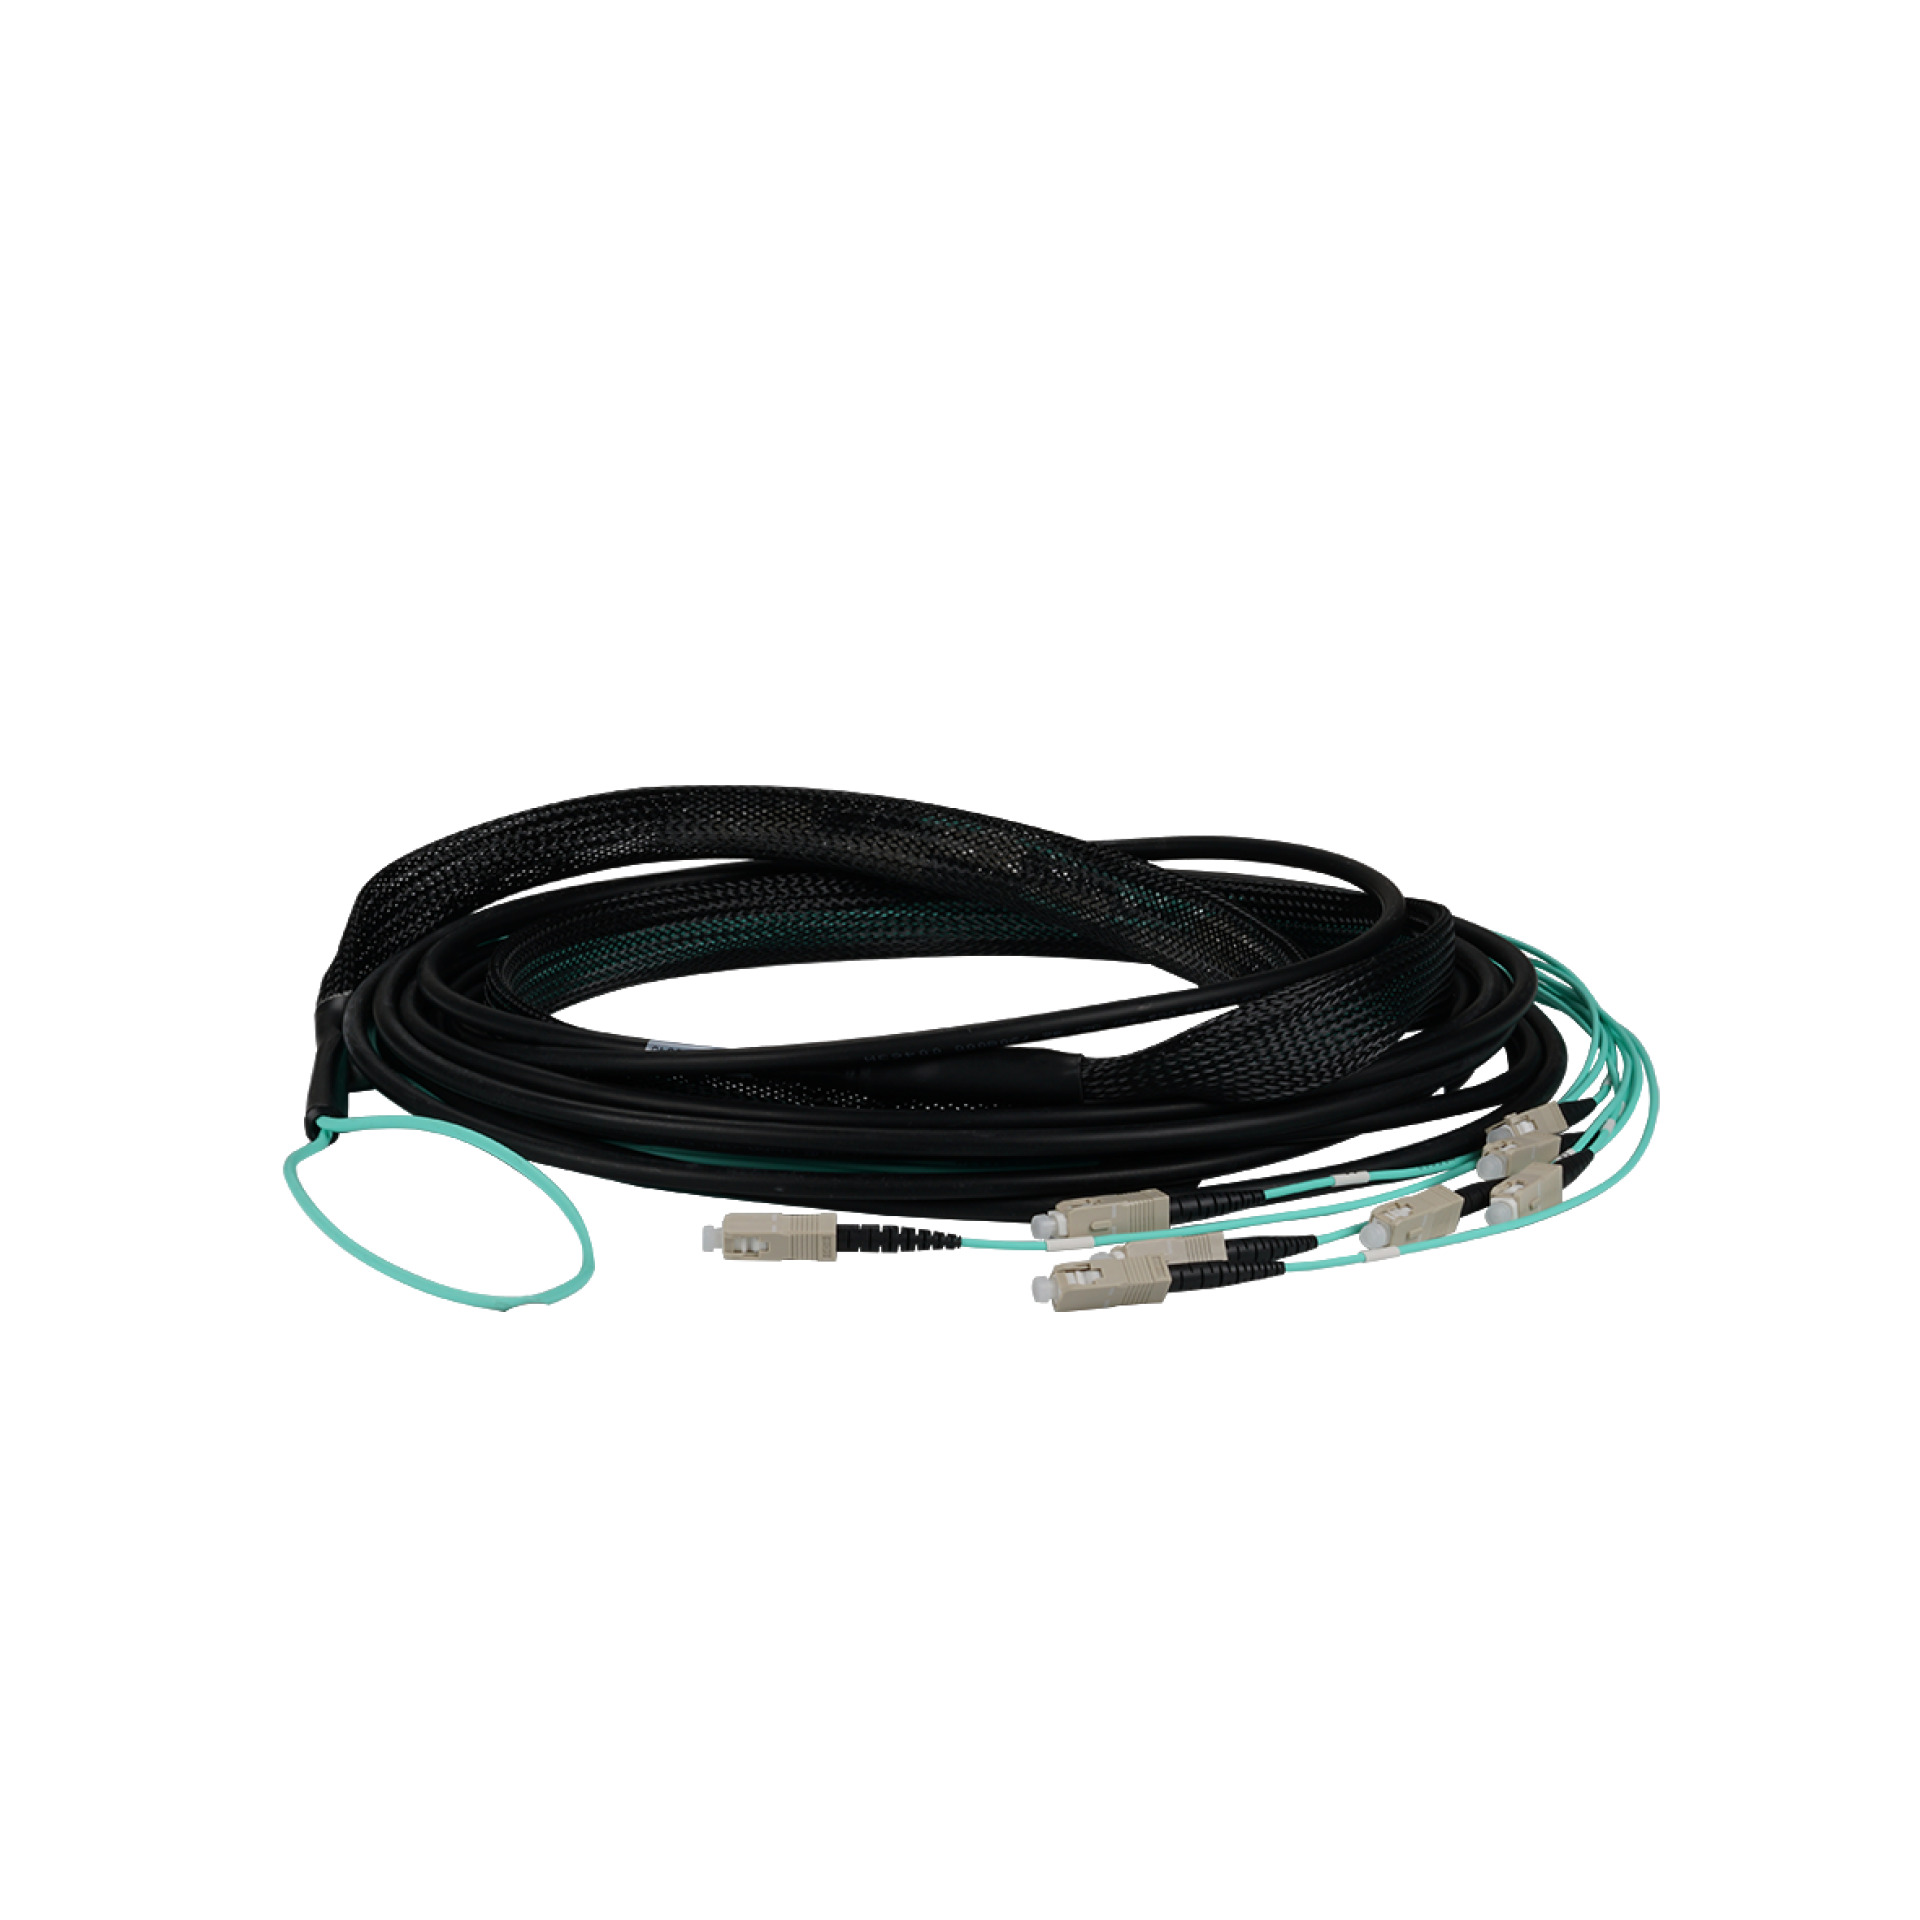 Trunk cable U-DQ(ZN)BH 8G 50/125, SC/SC OM3 80m